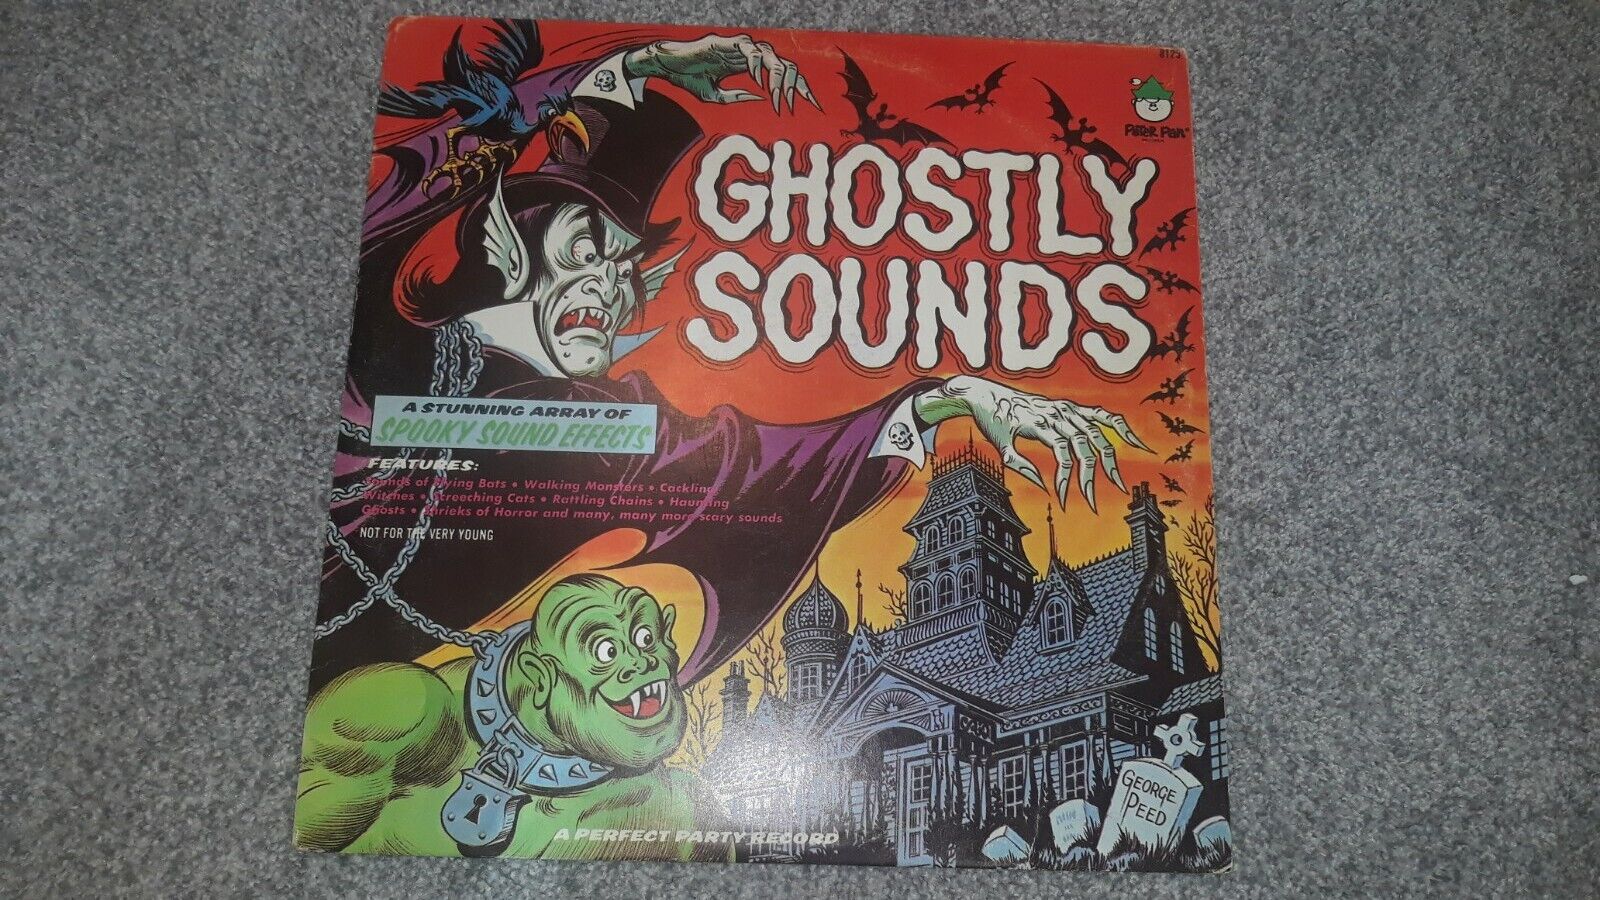 Ghostly Sounds Peter Pan Records Spooky Sound Effects LP Record 12" 8125 VG/VG+